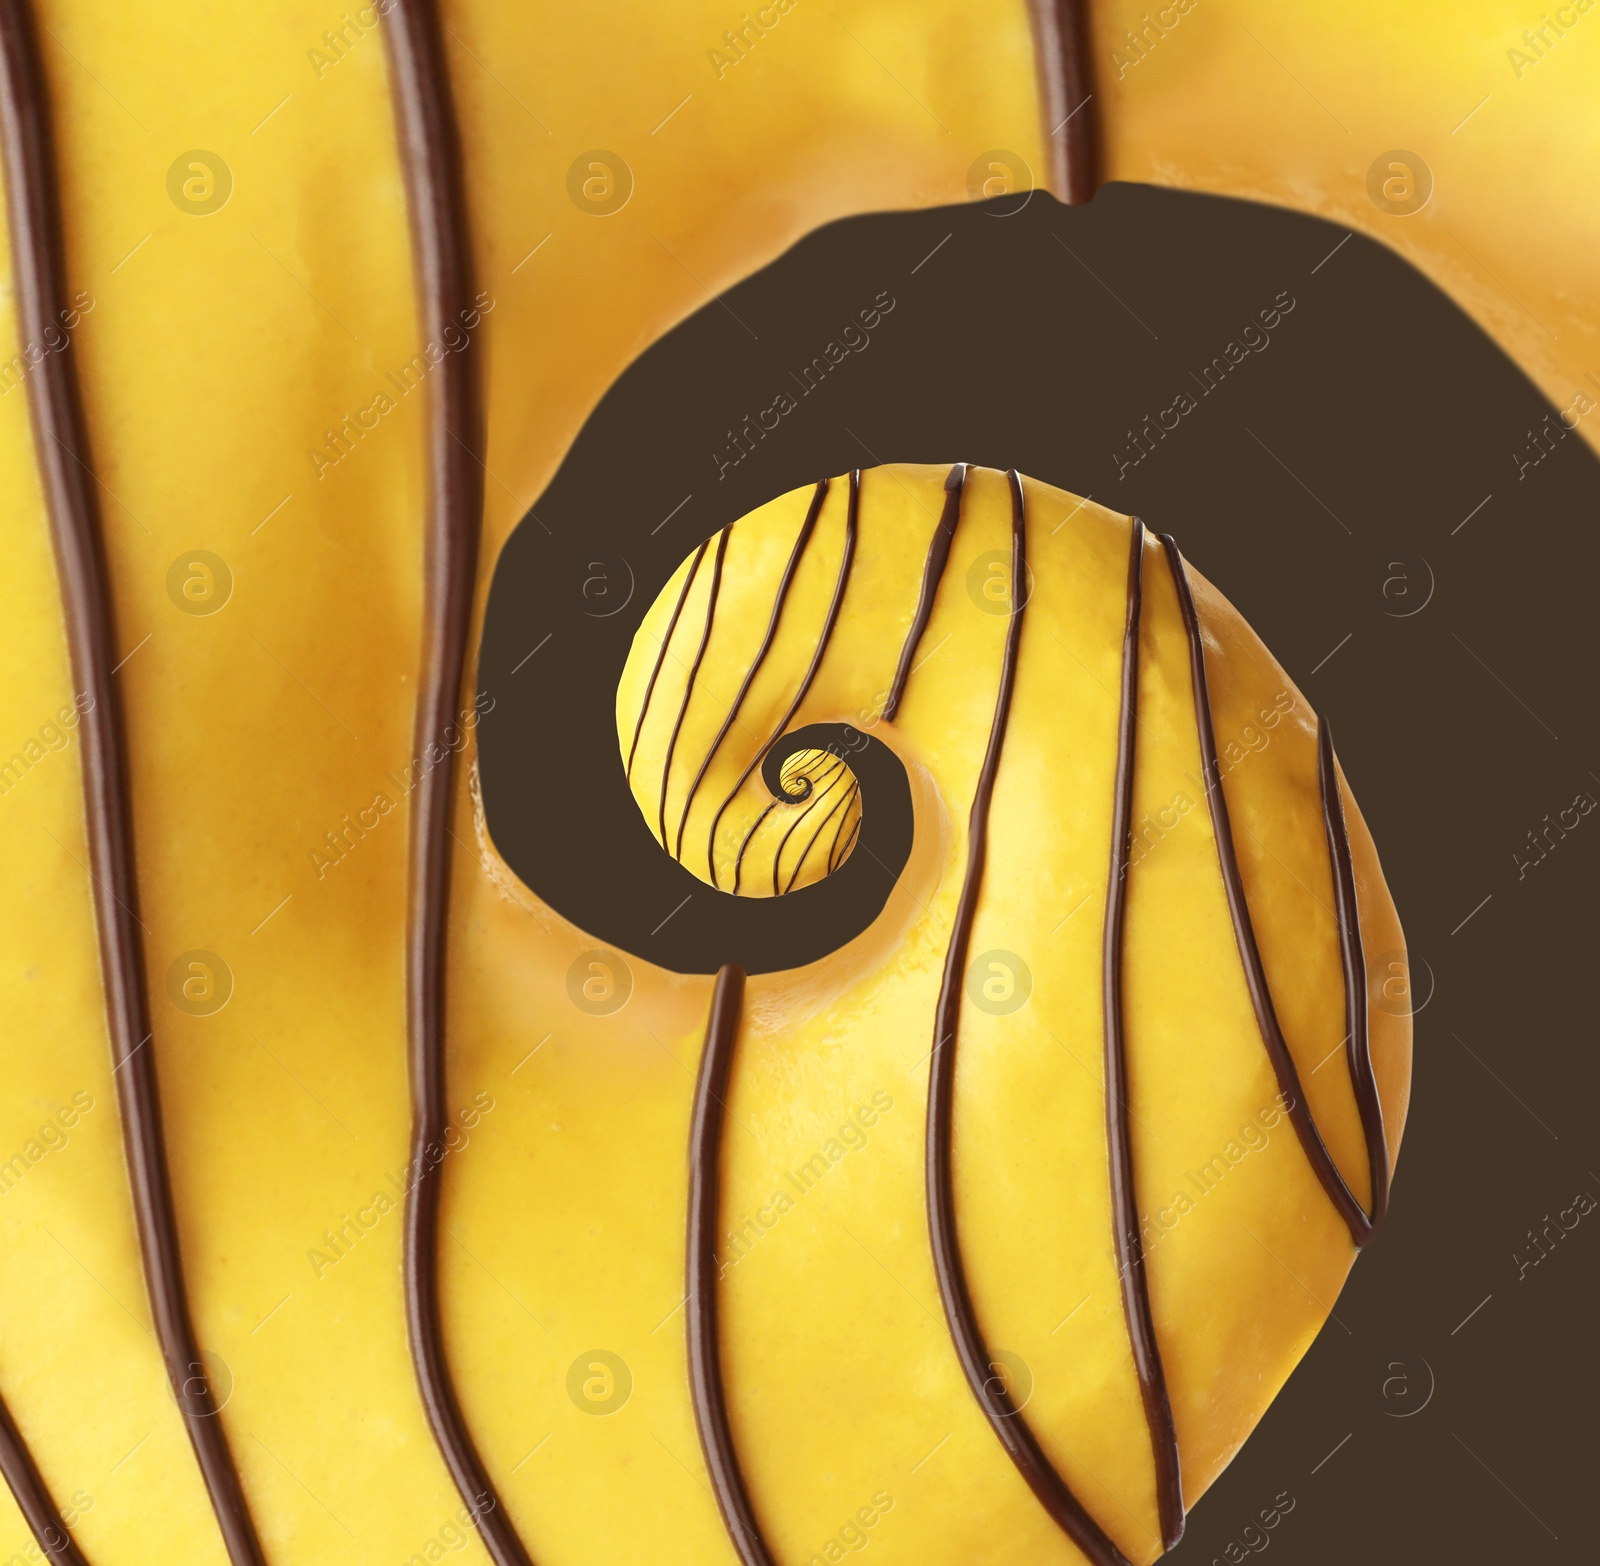 Image of Twisted donut with banana icing and chocolate topping on brown background, spiral effect